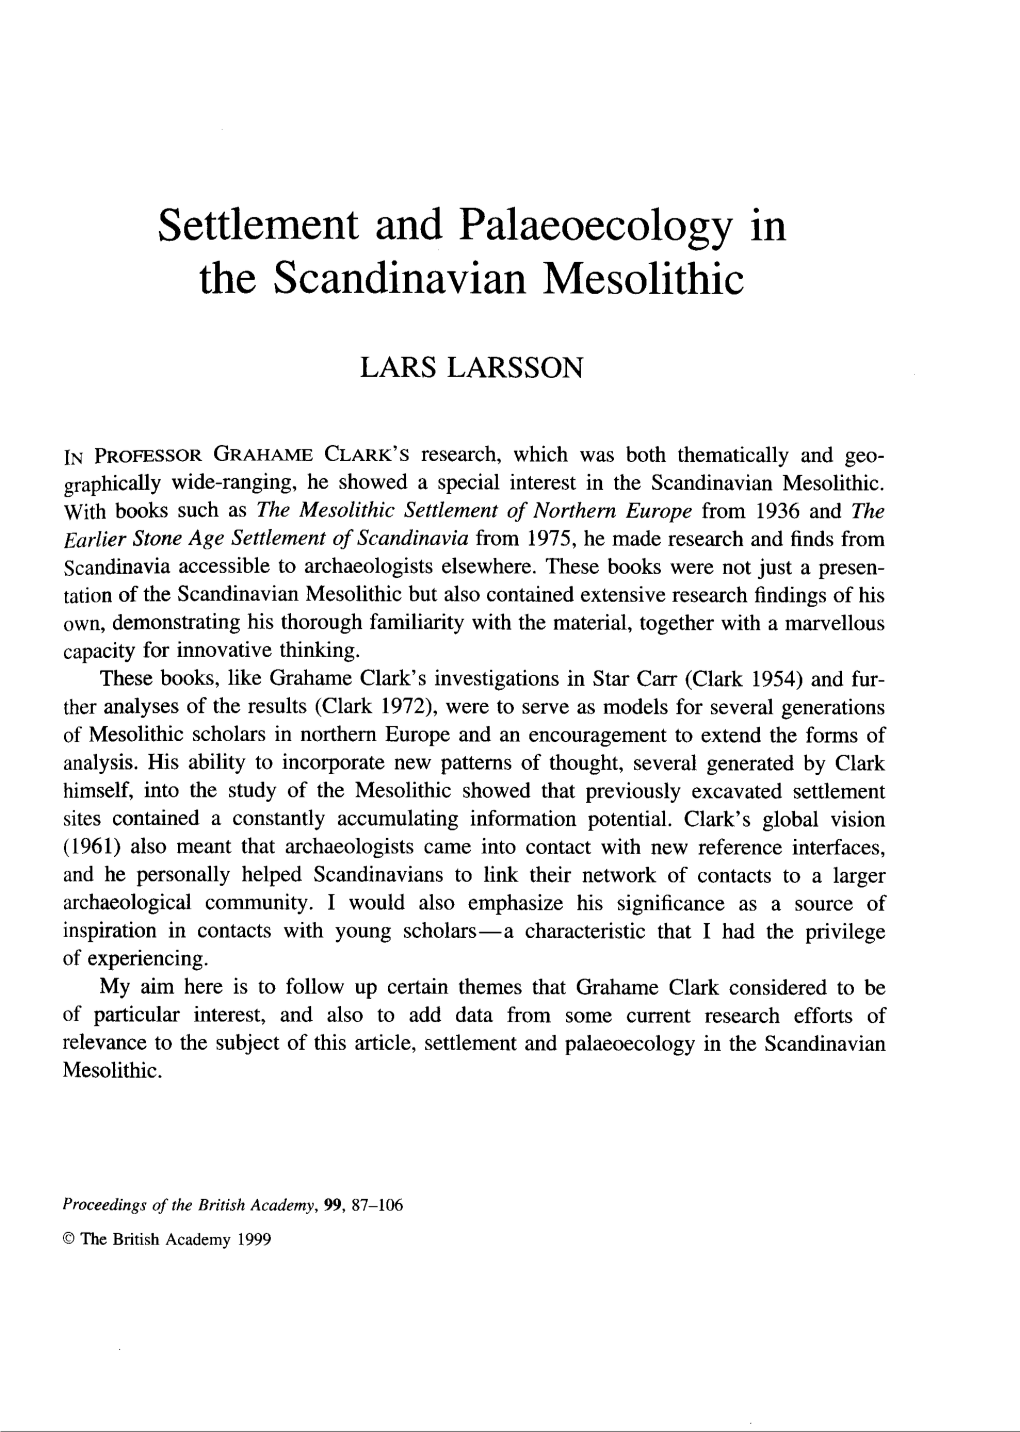 Settlement and Palaeoecolog Y in the Scandinavian Mesolithic